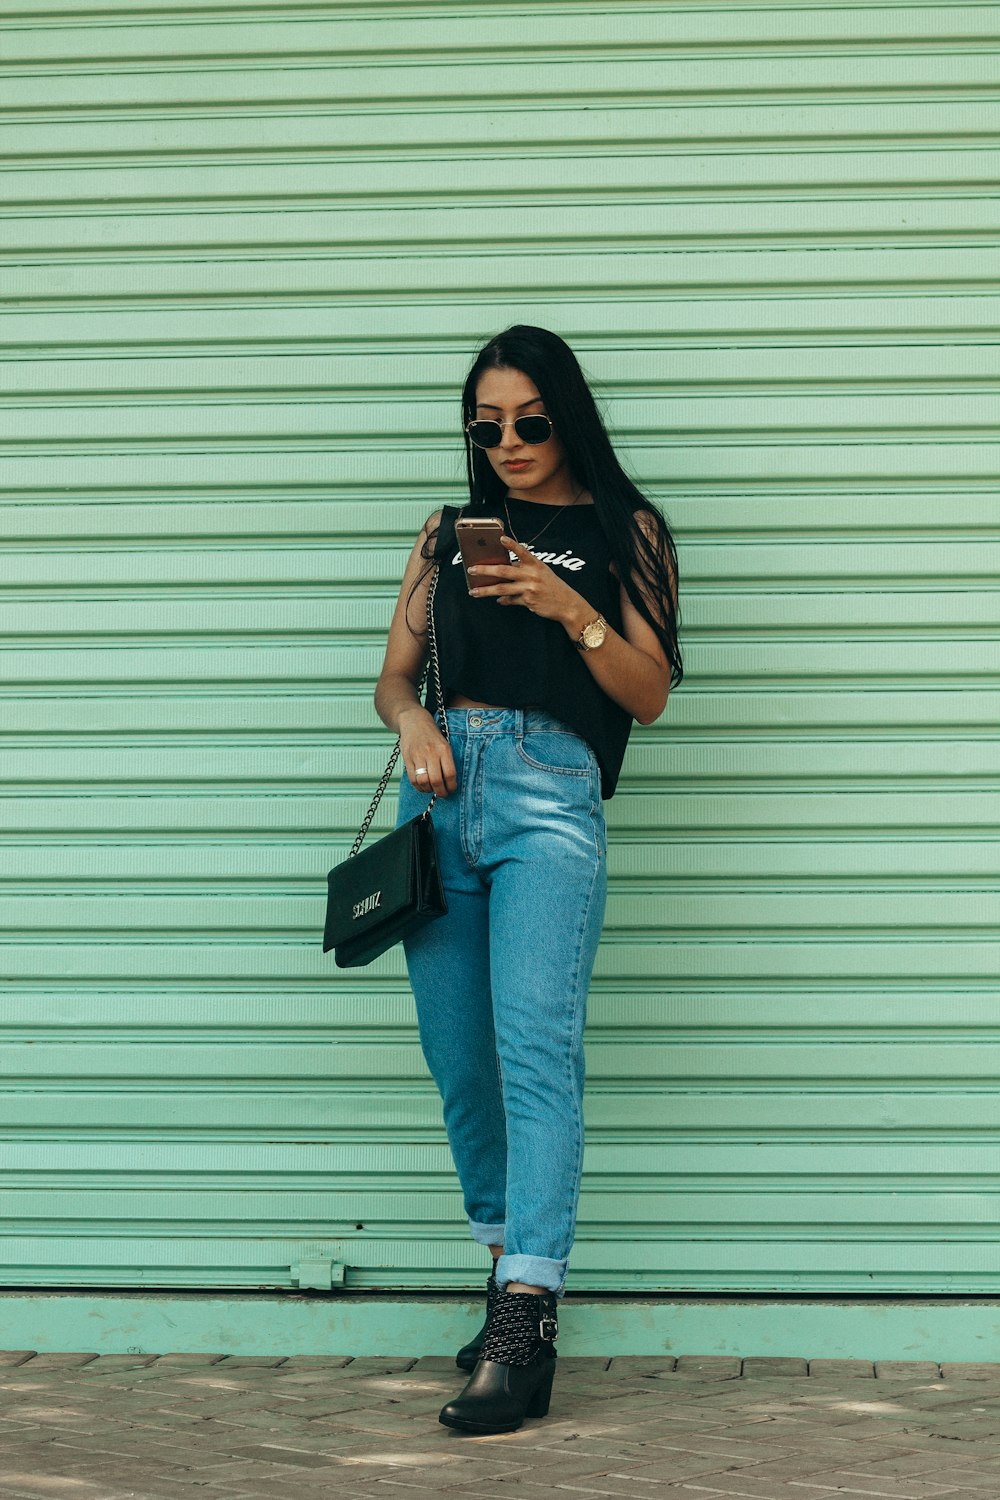 woman in black sleeveless top holding smartphone outdoors